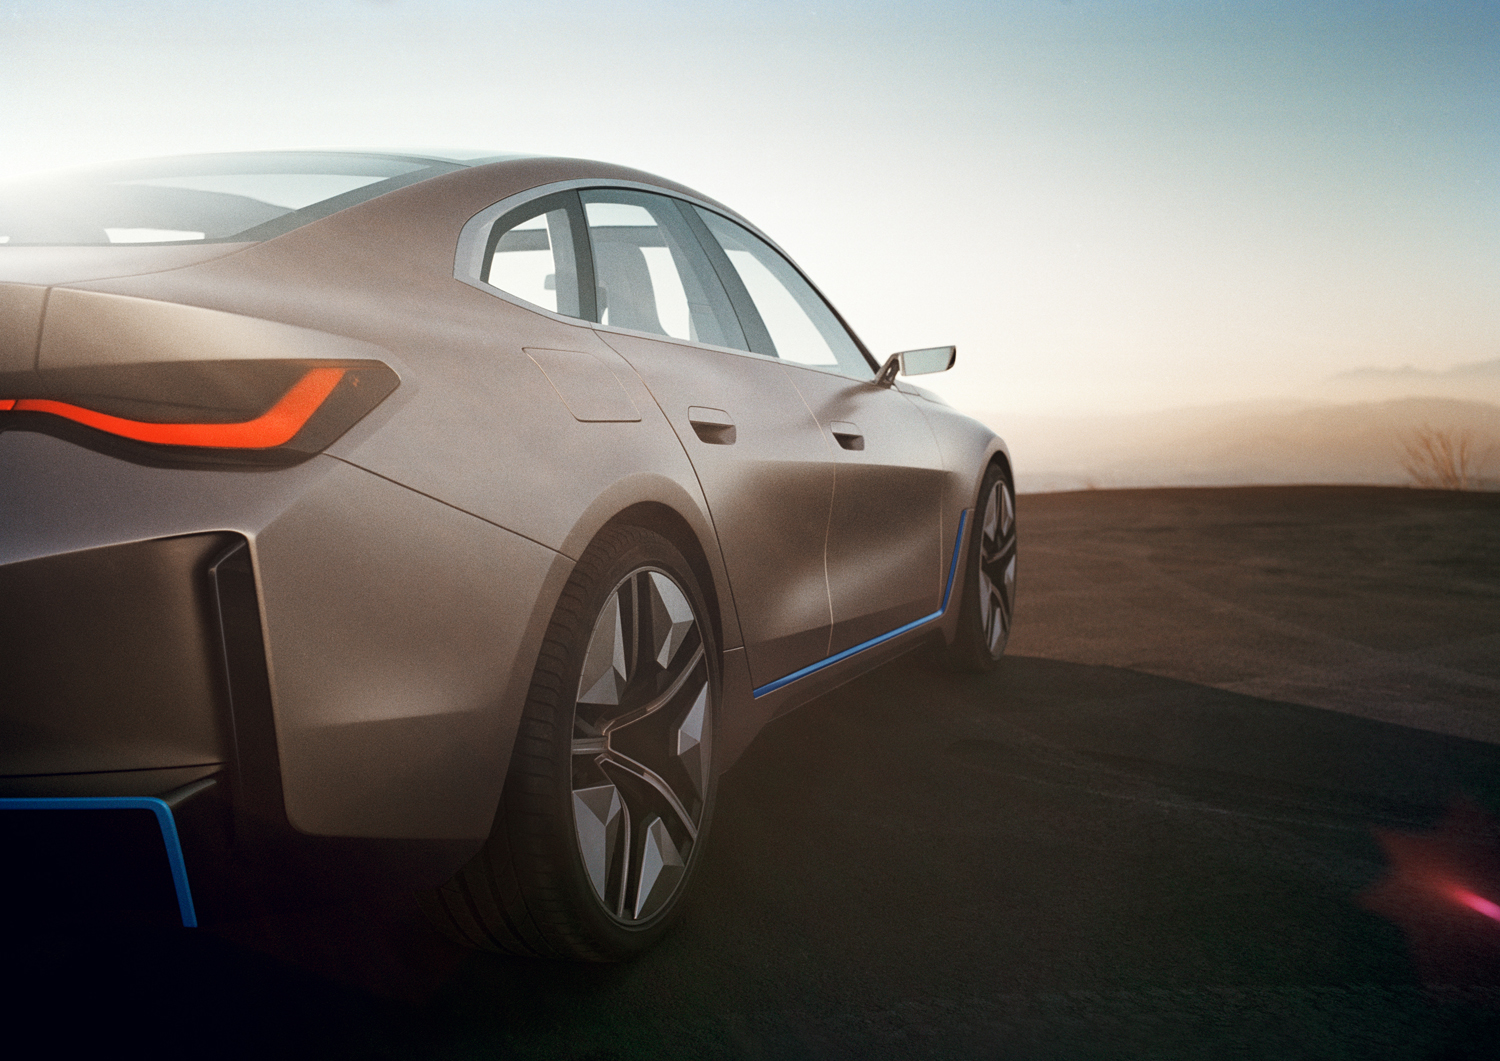 2020 BMW Concept i4 Electric GT Previews 2021 Production Model